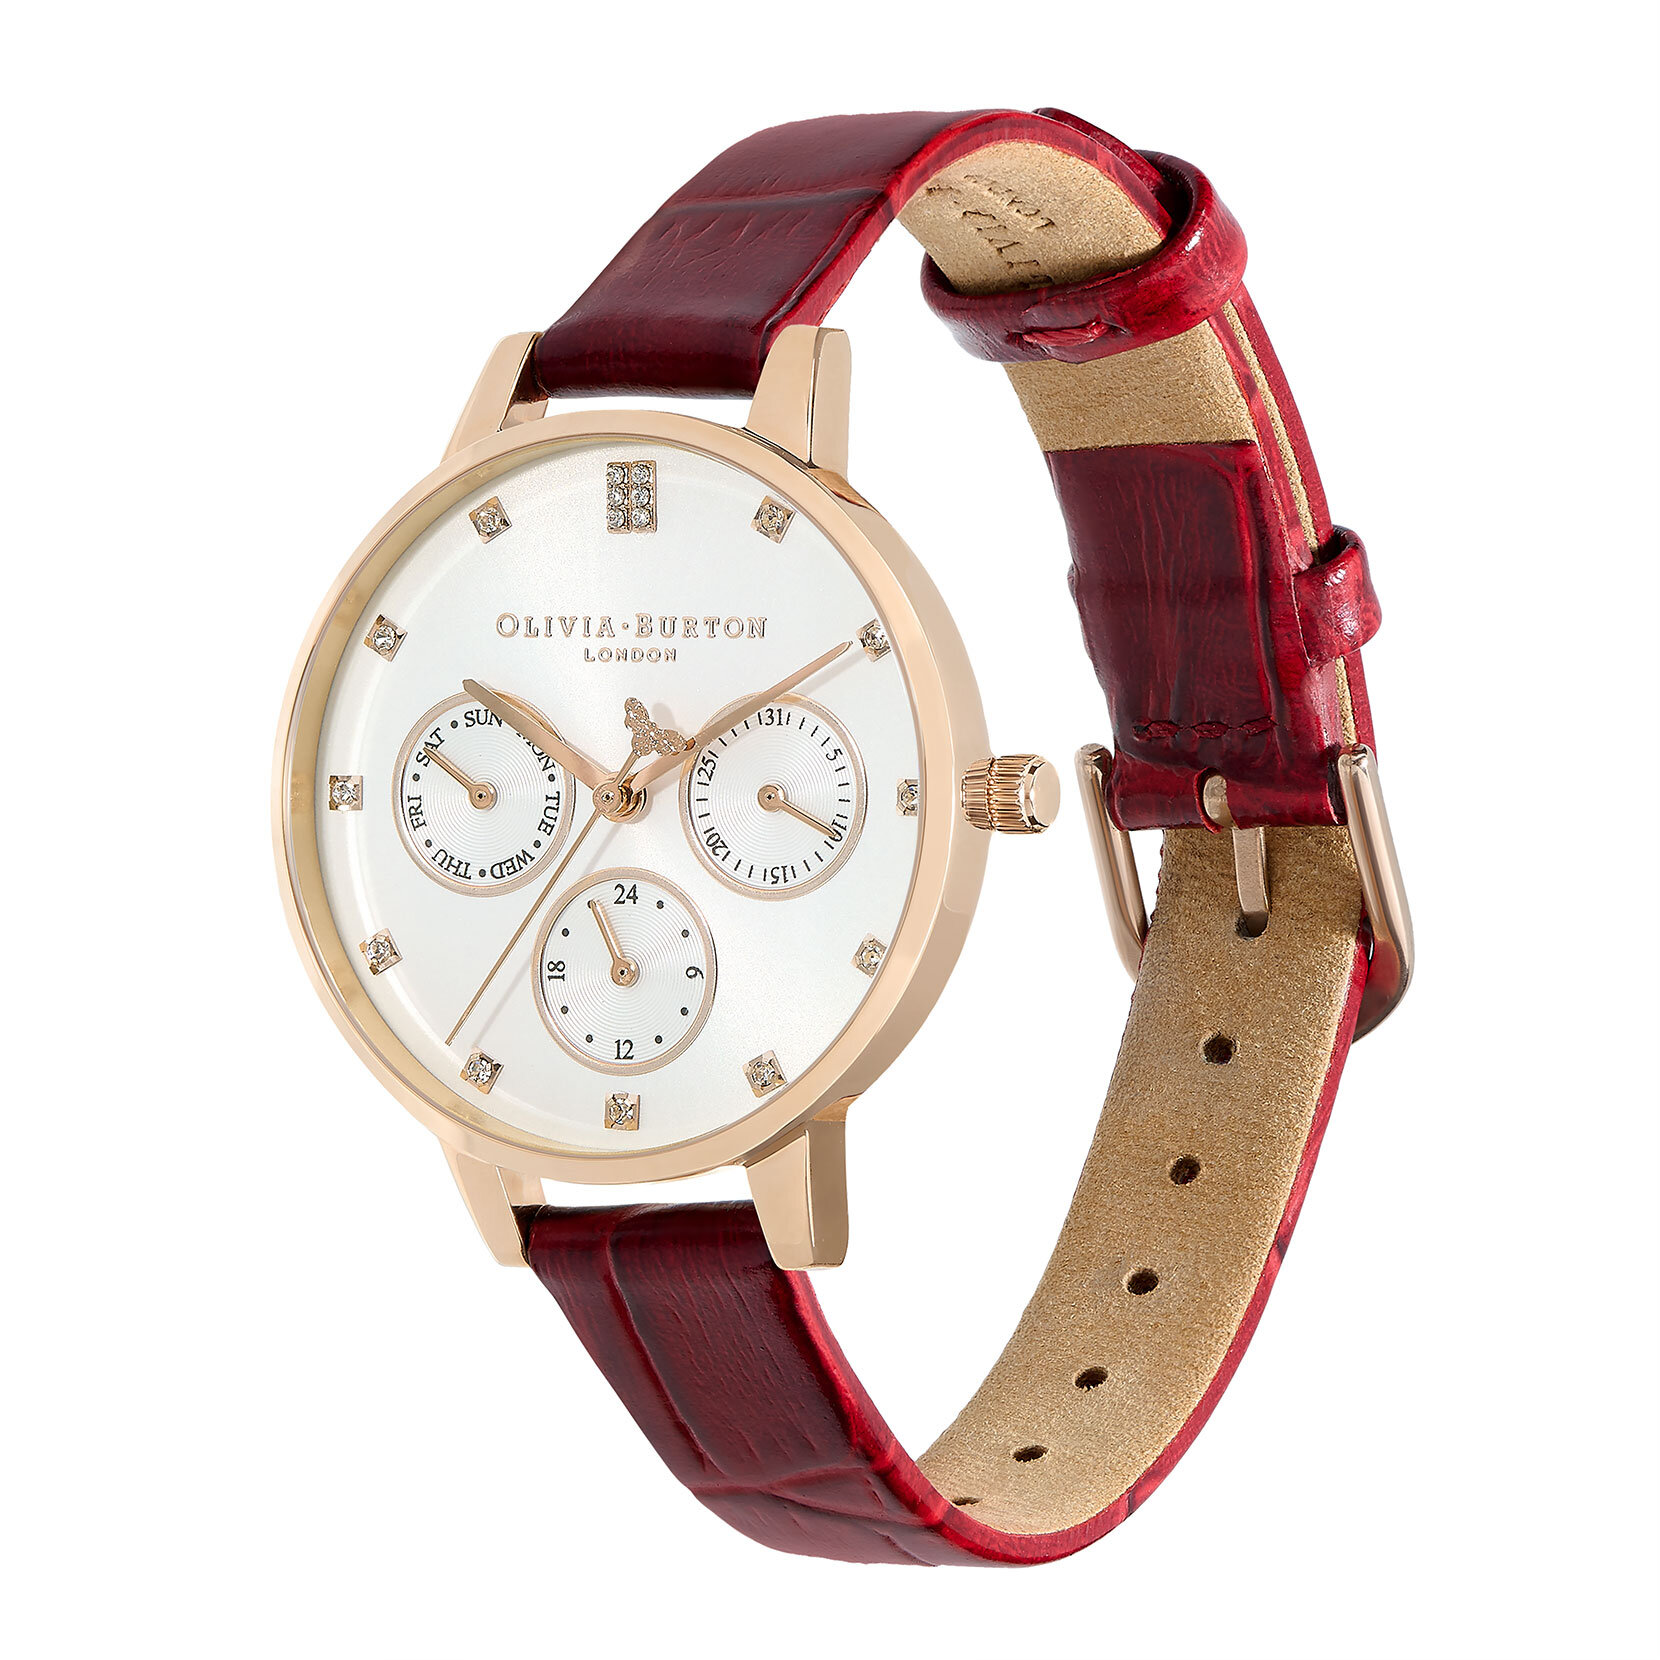 34mm White, Carnation Gold & Burgundy Leather Strap Watch